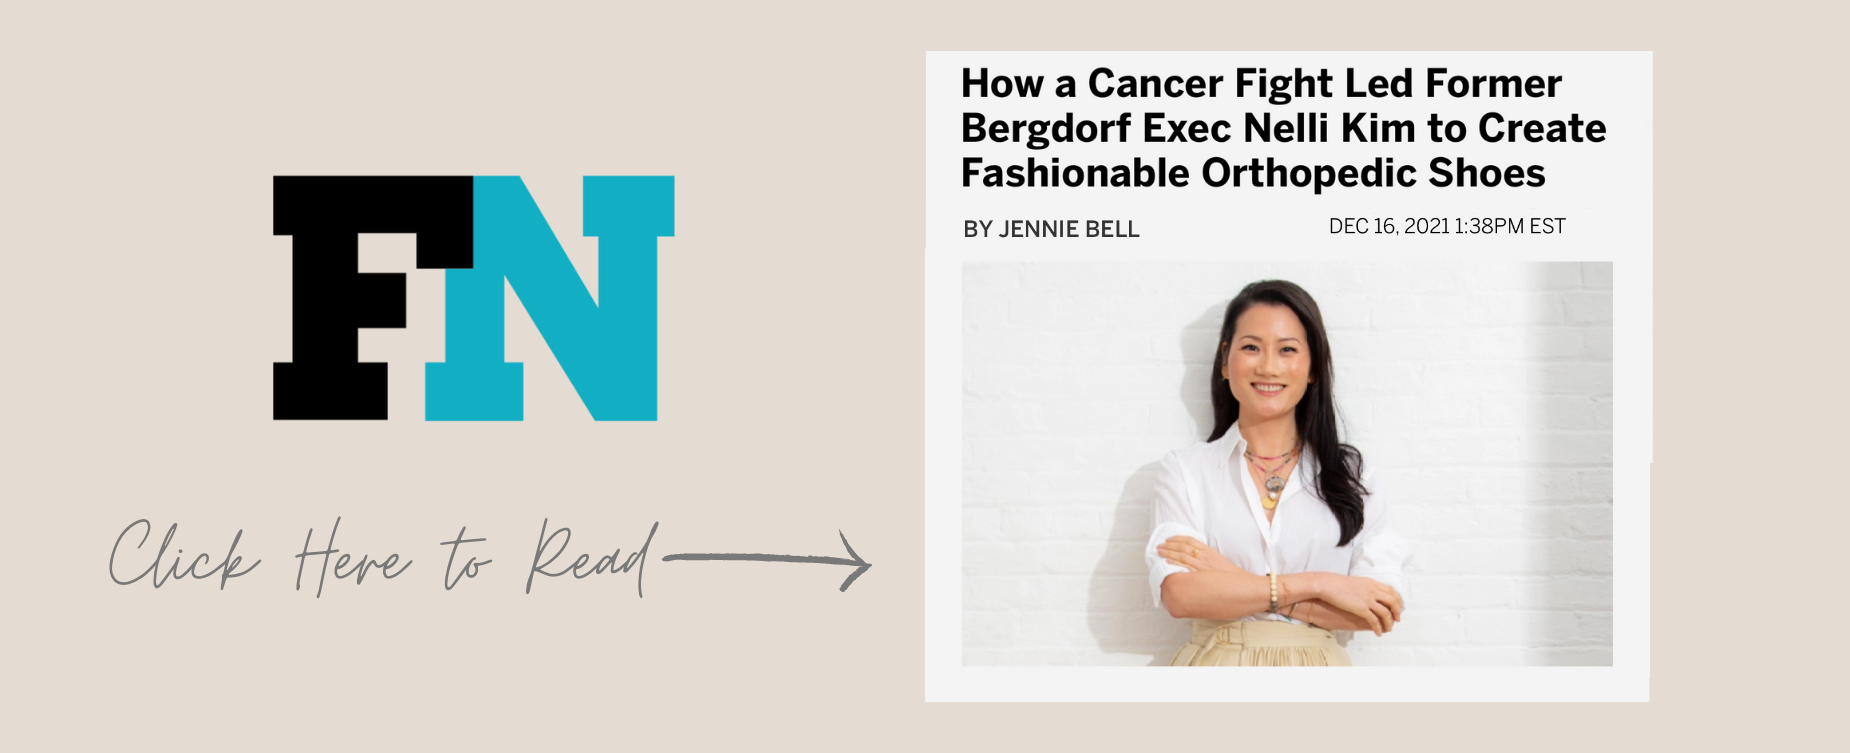 Footwear News RĒDEN Article How a Cancer Fight Led Former Bergdorf Exec Nelli Kim to Create Fashionable Orthopedic Shoes